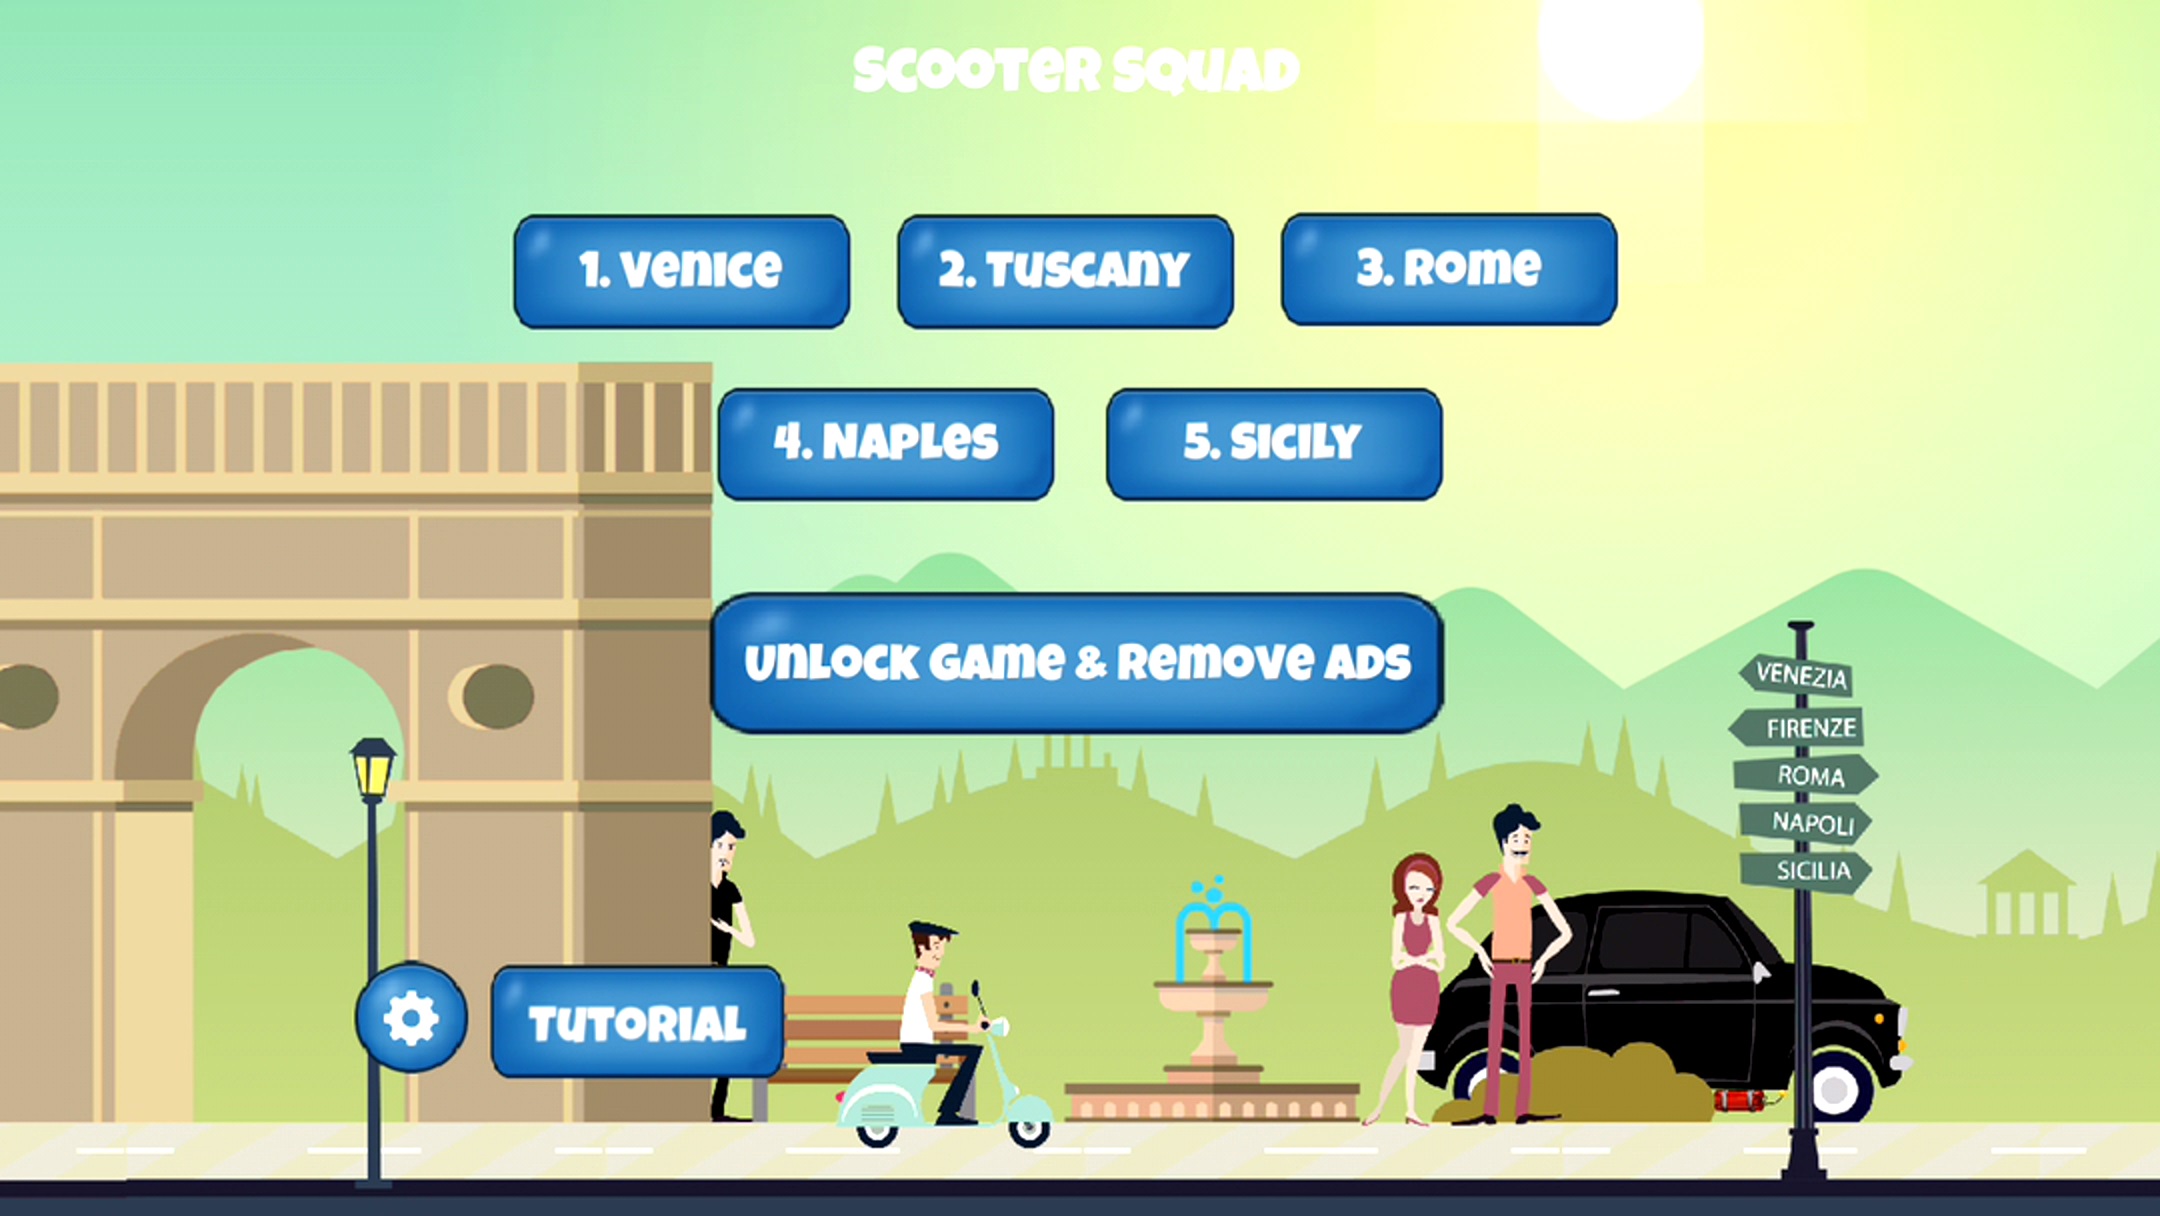 androidアプリ Scooter Squad - Action Adventure Game攻略スクリーンショット1